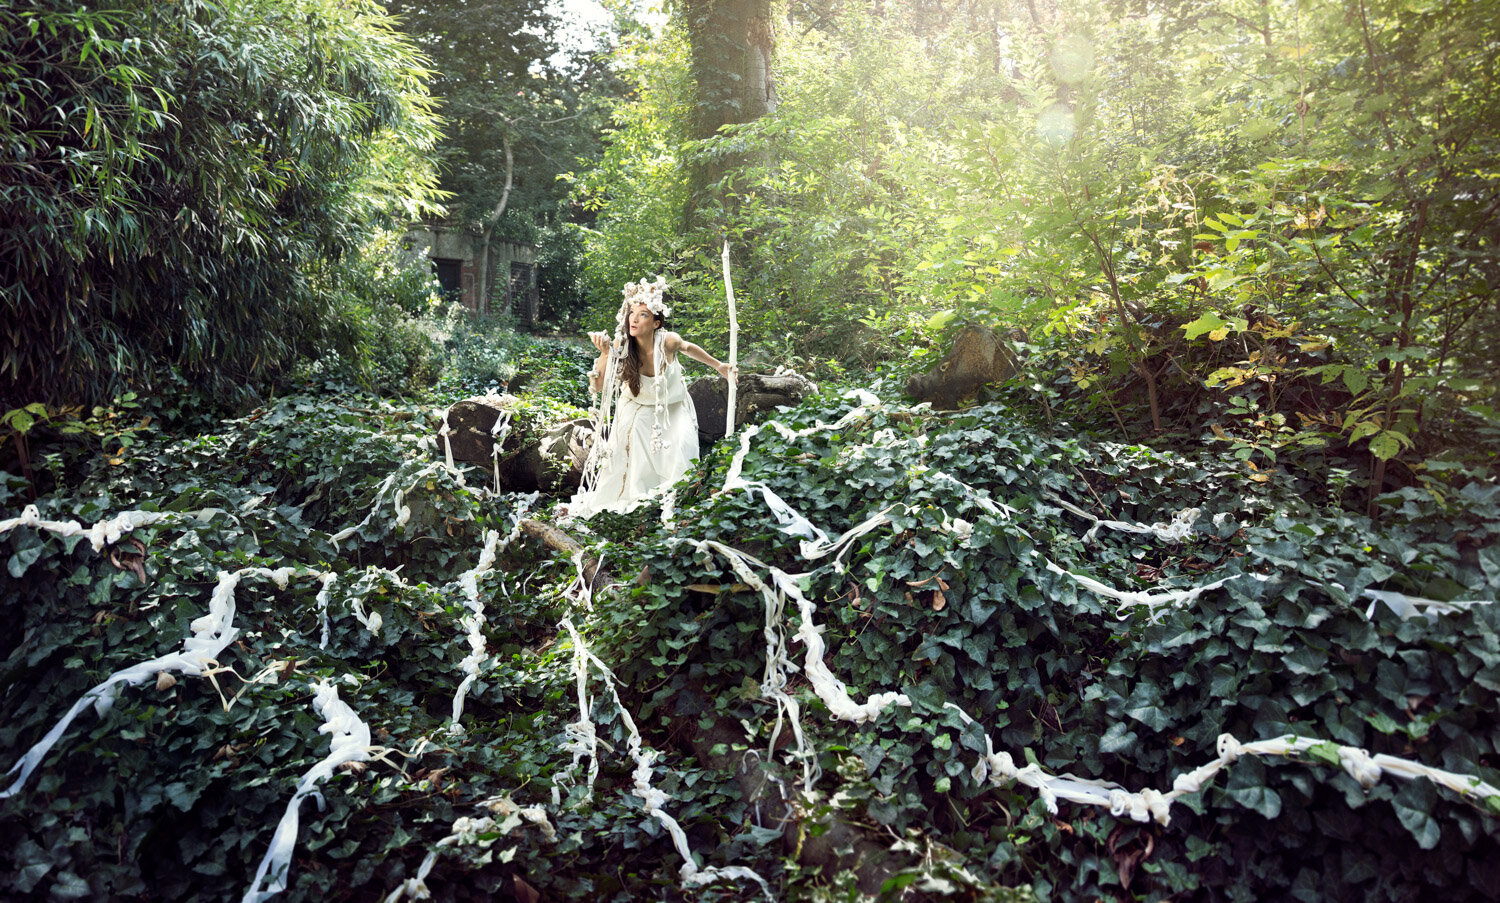 magical tendrils of knotted material flow away from woman with staff in the middle of a field of ivy